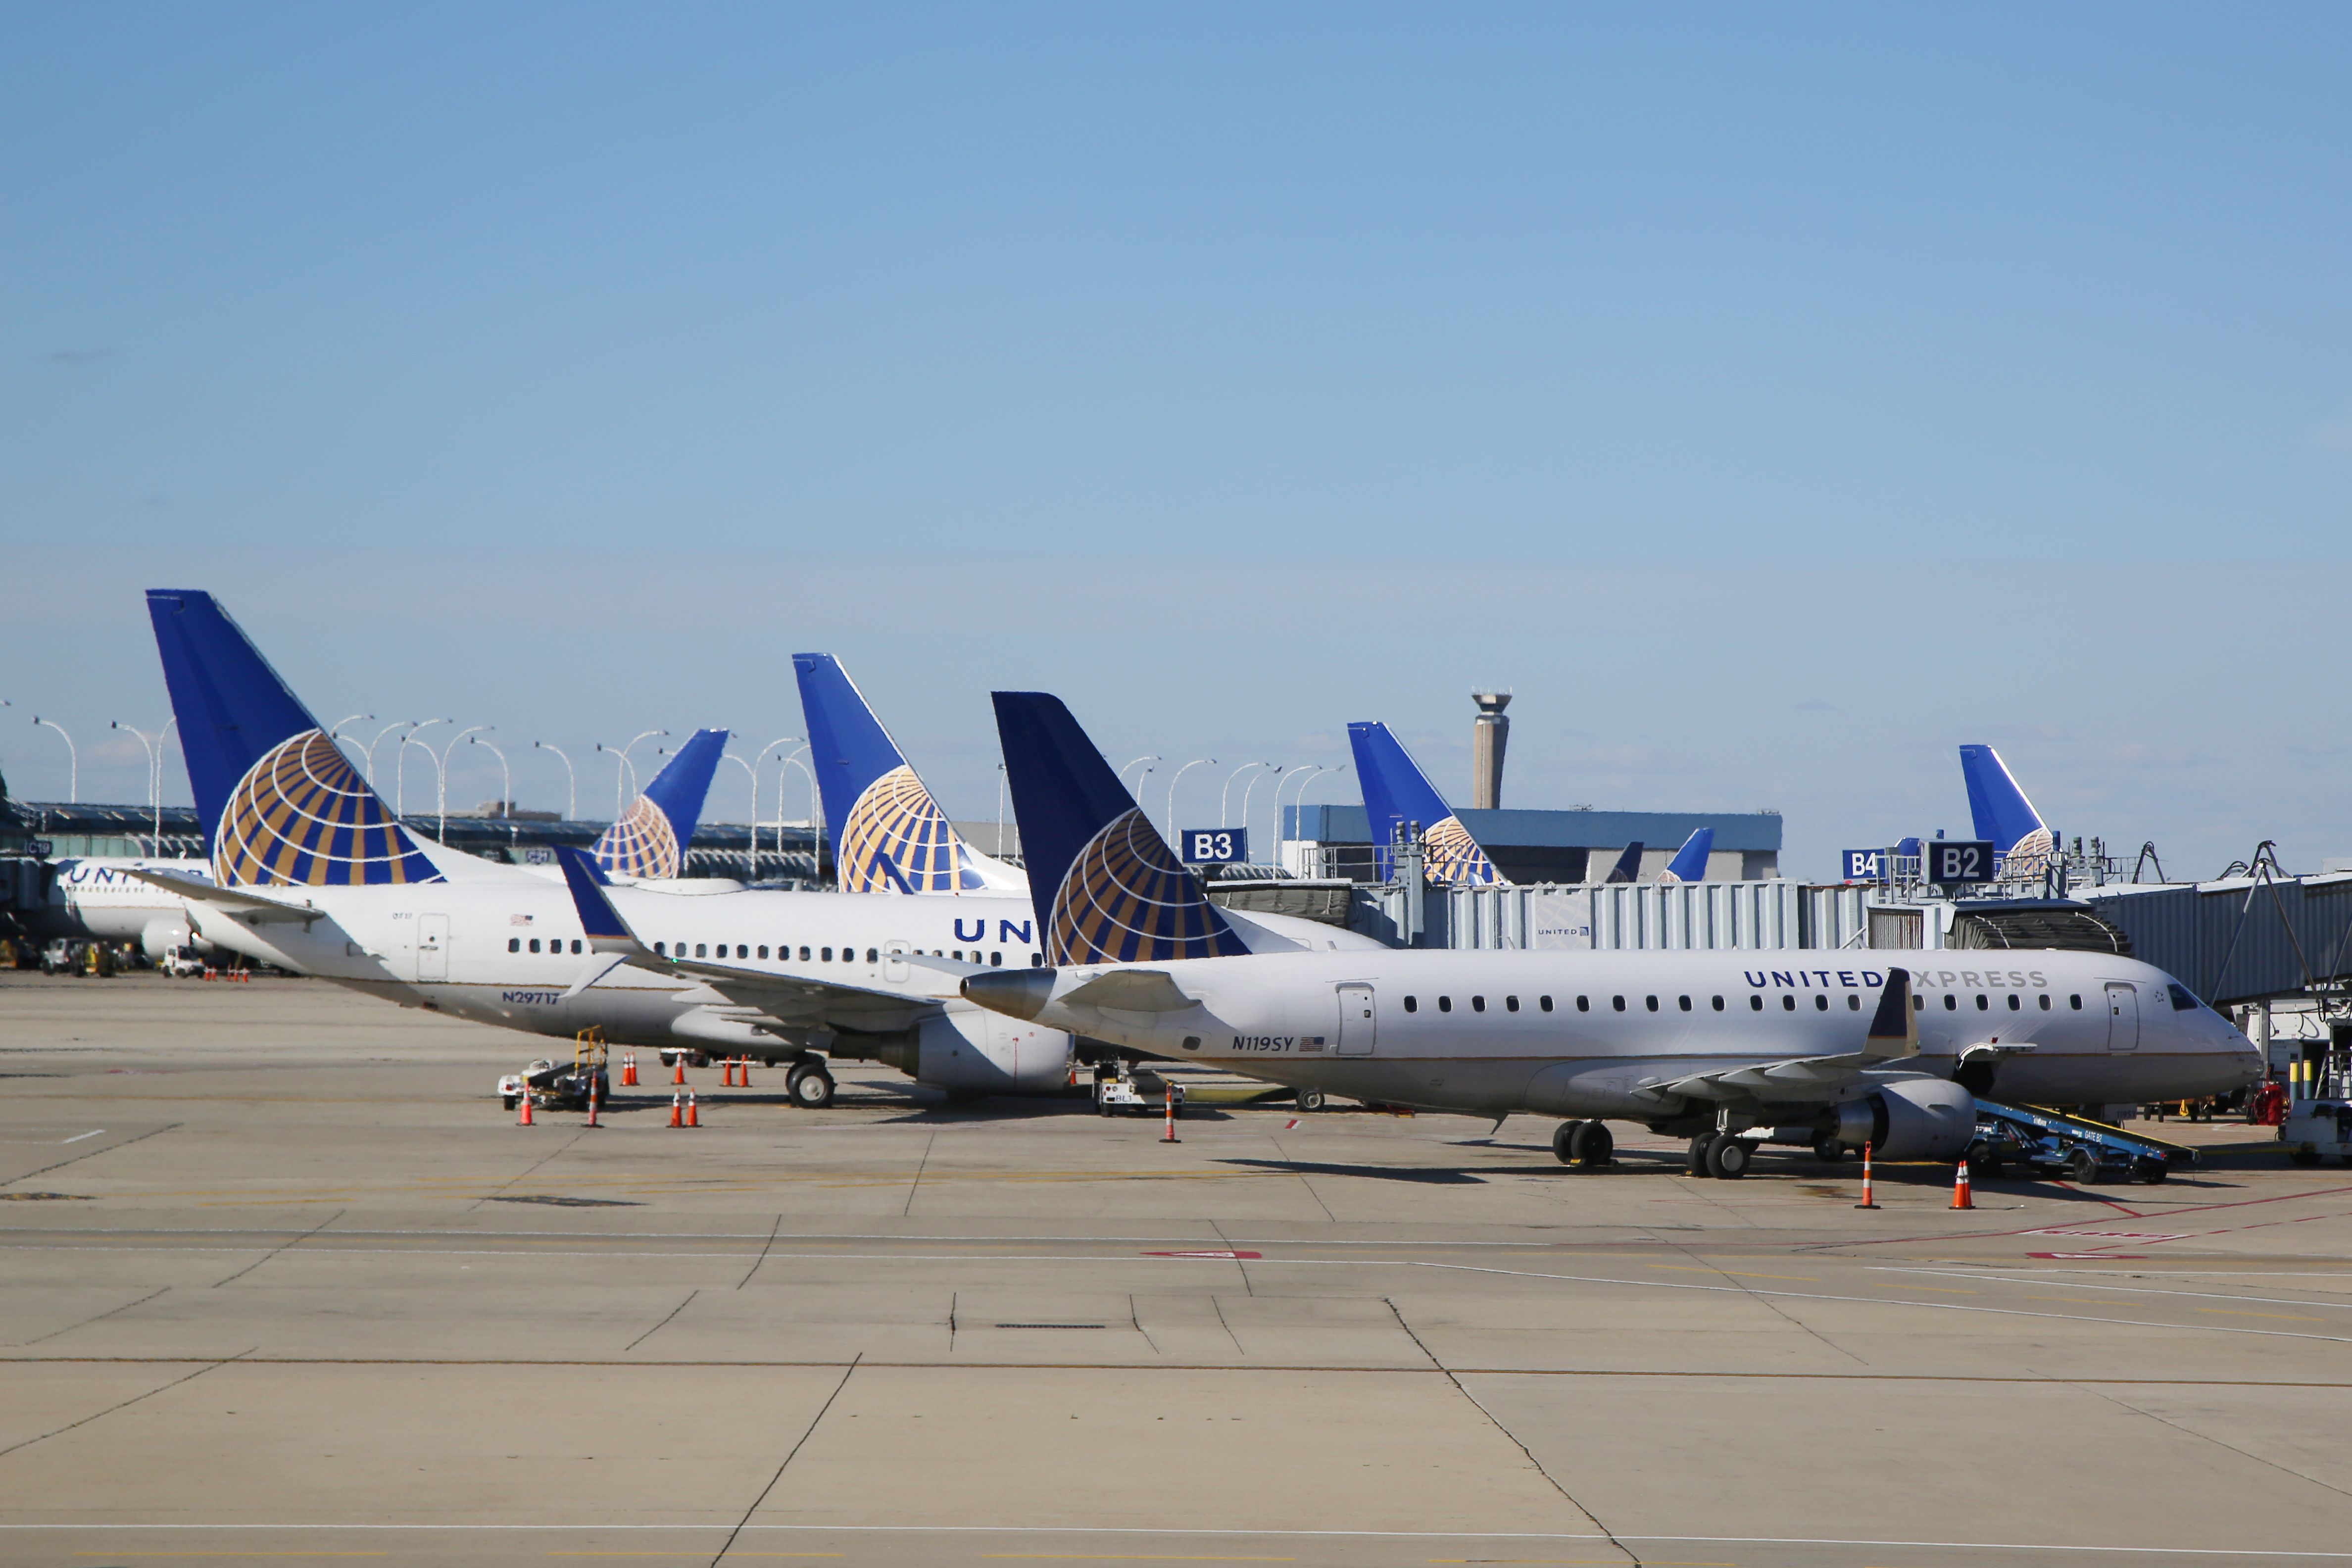 Multiple United Airlines Aircraft parked on an airport apron.